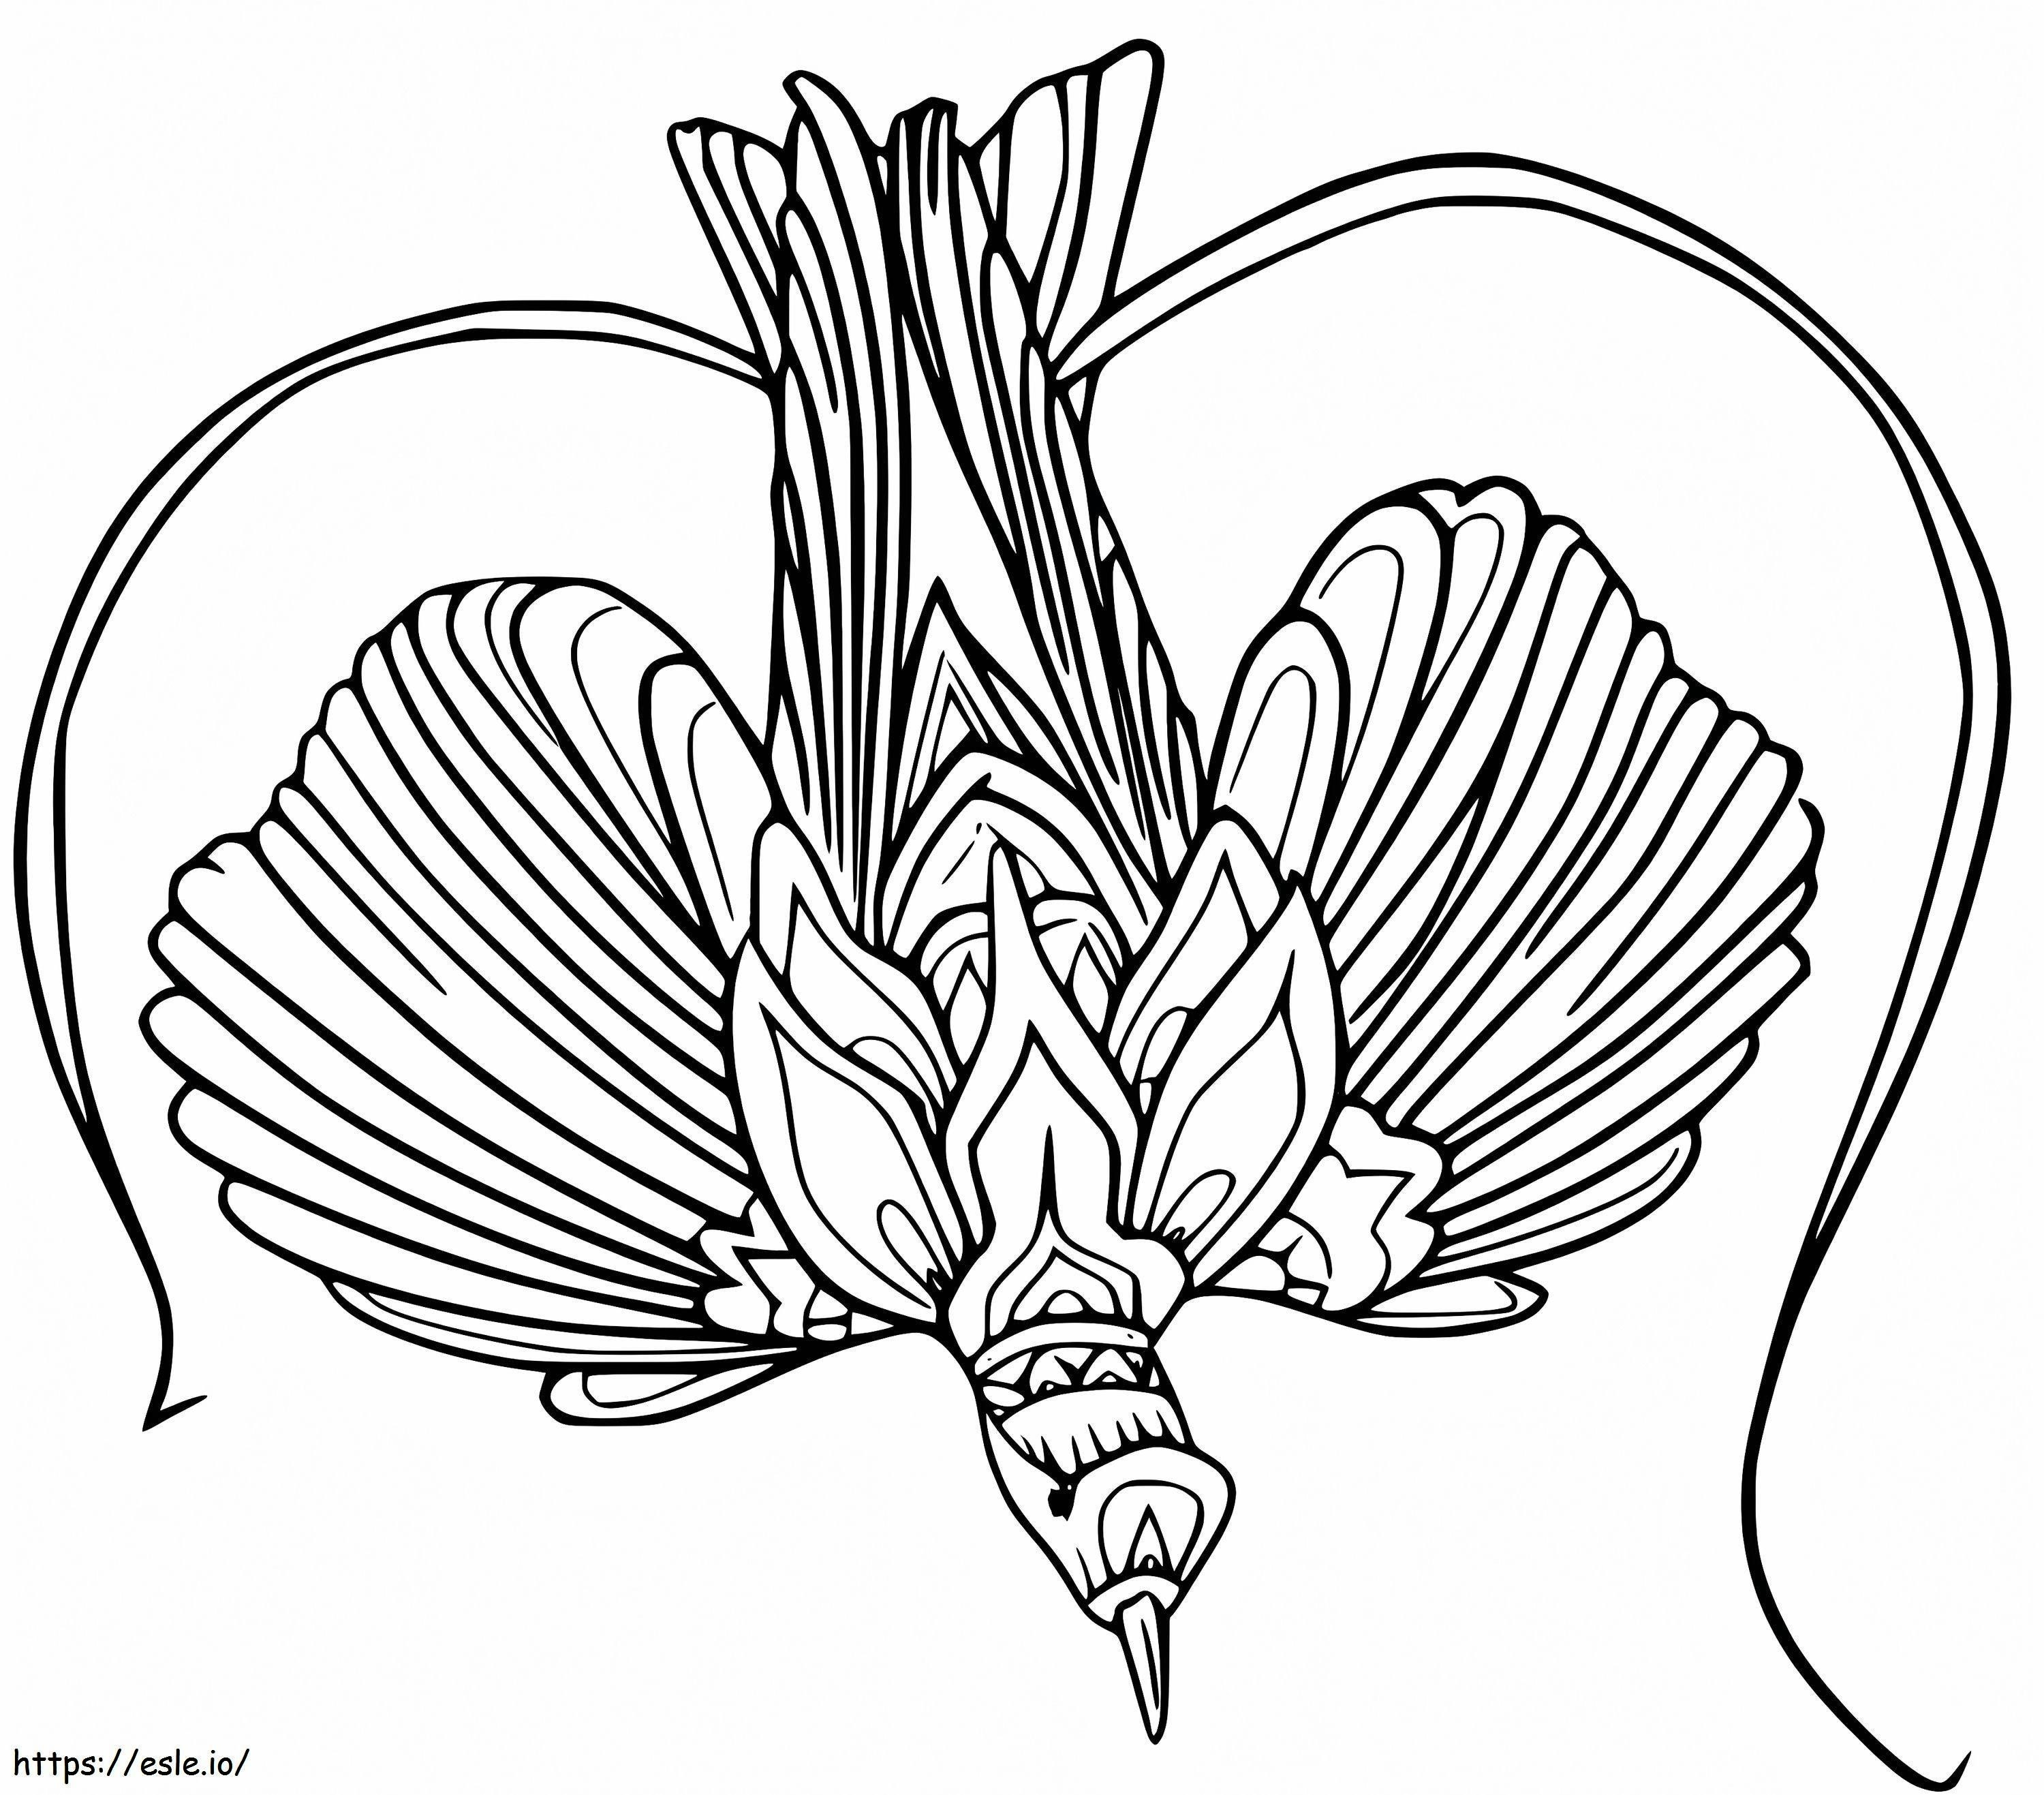 Red Bird Of Paradise coloring page